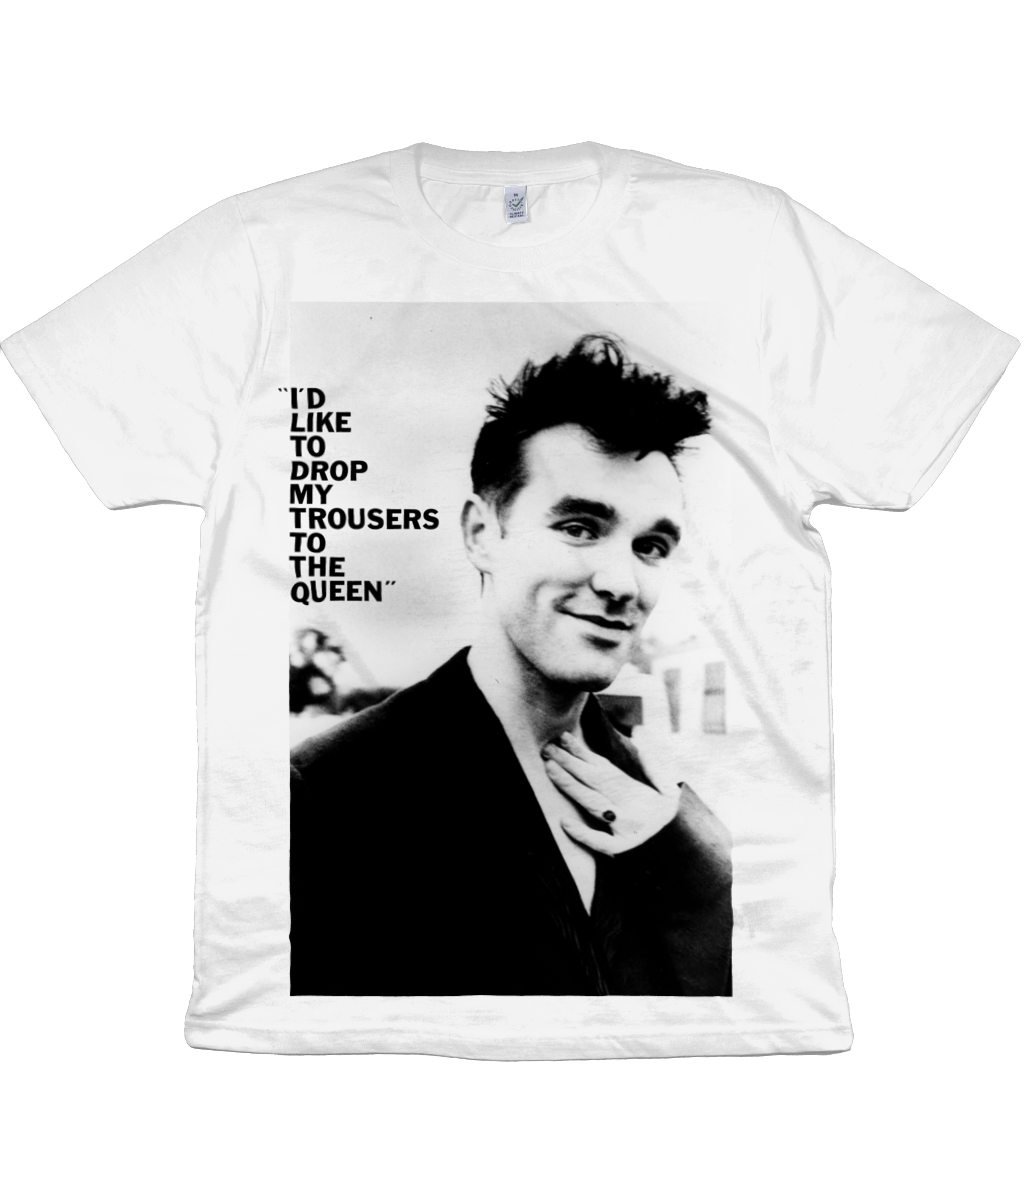 The Smiths - "I'D LIKE TO DROP MY TROUSERS TO THE QUEEN" - 1985